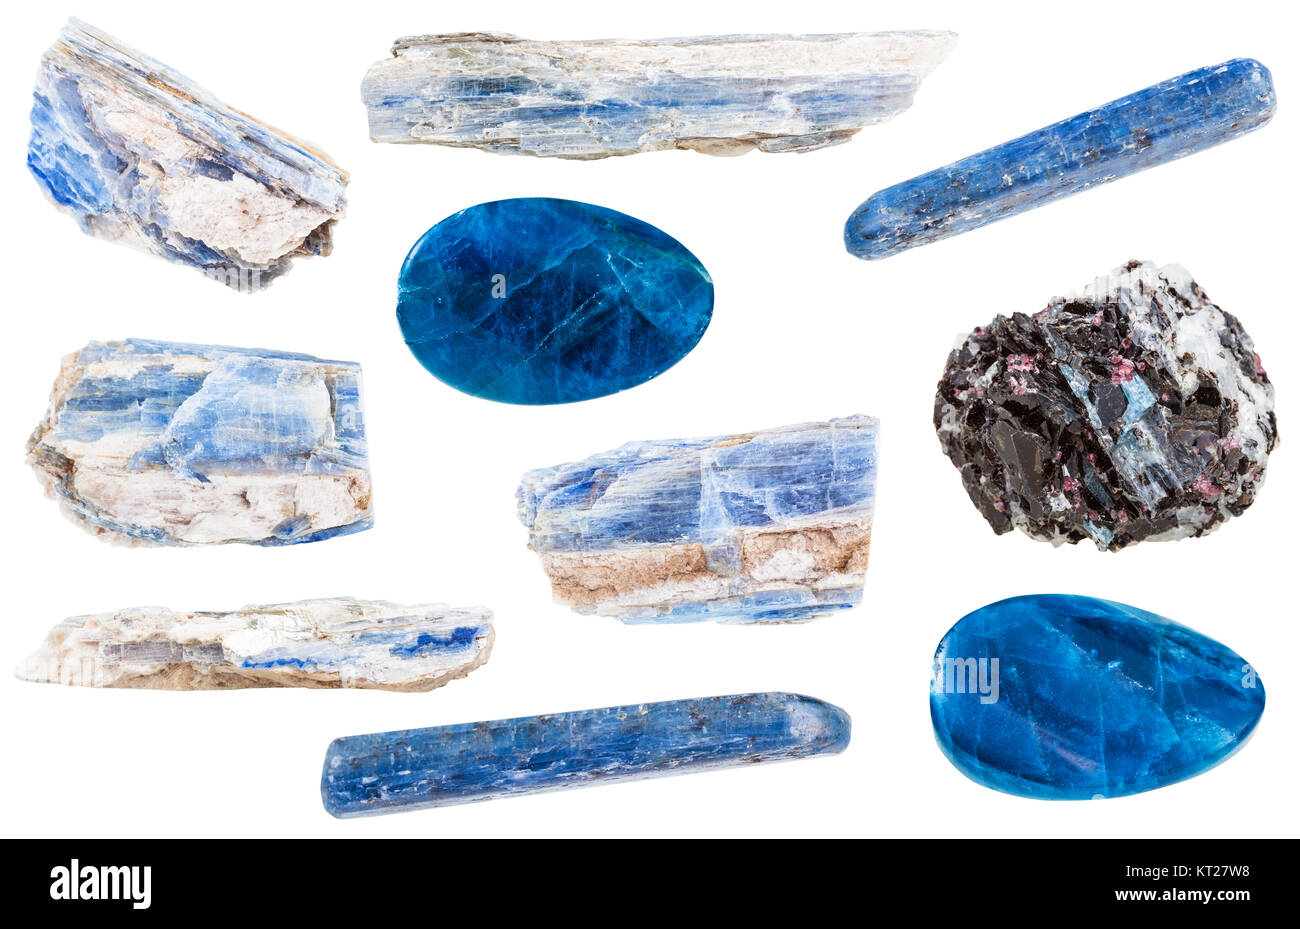 collection of polished and raw kyanite stones Stock Photo